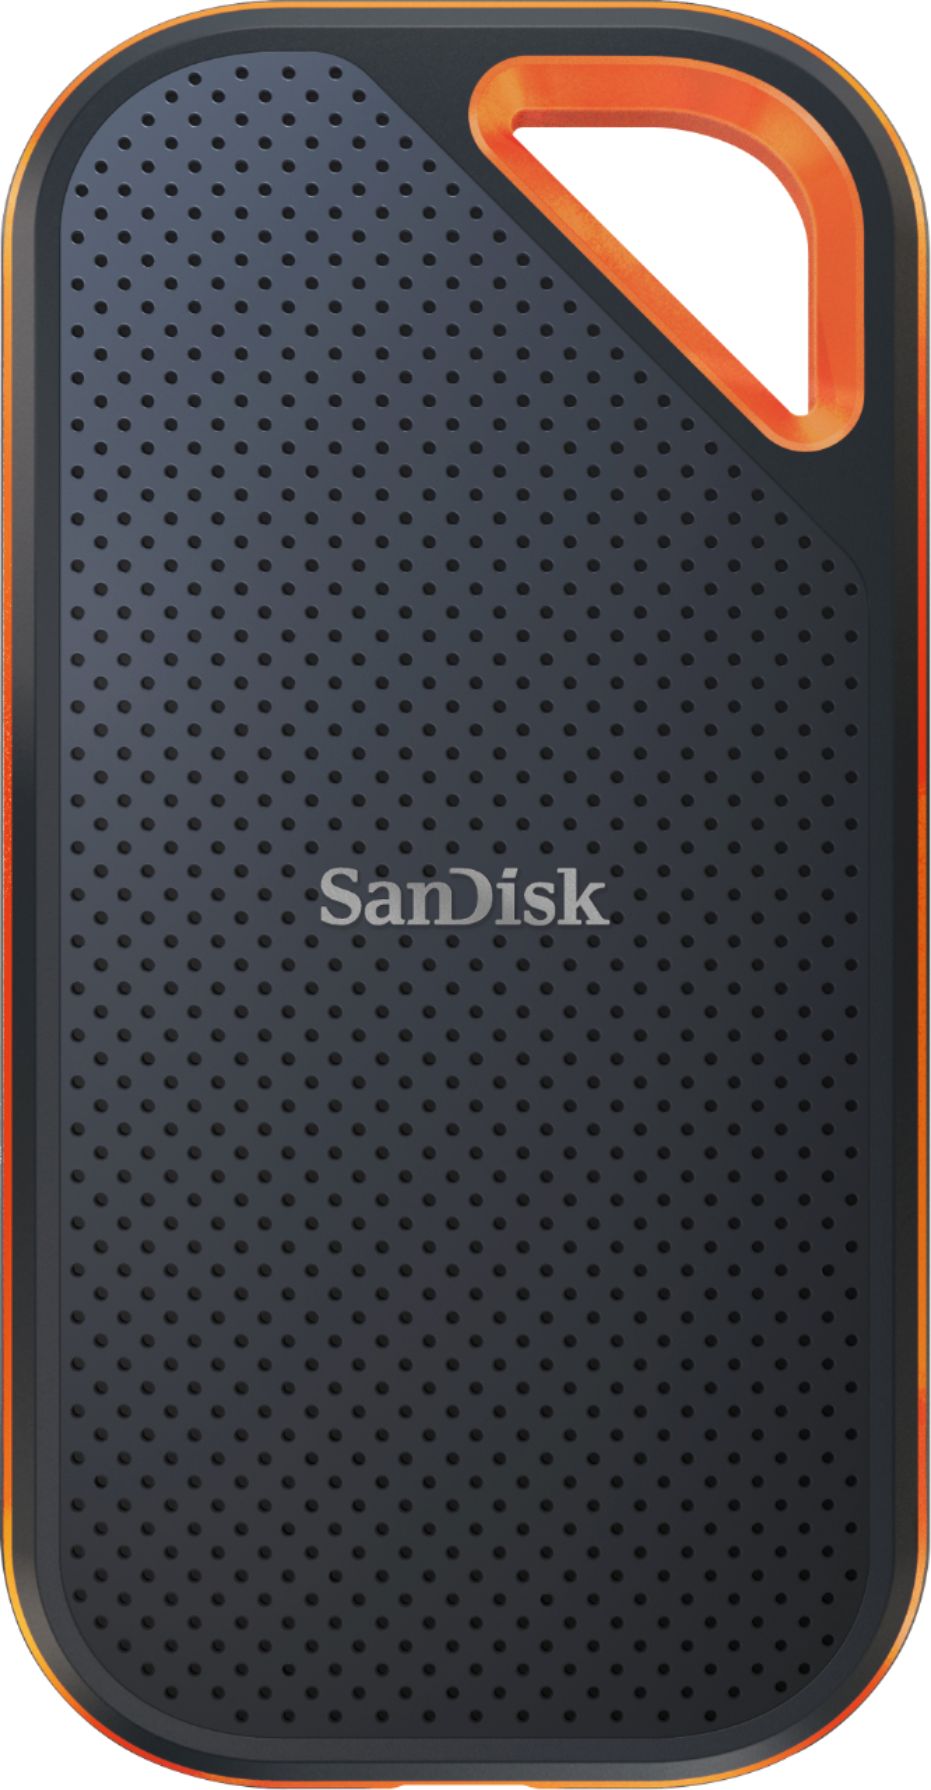 SanDisk - Extreme Pro 1TB External USB 3.1 Gen 2 Portable Solid State Drive - Black/Red